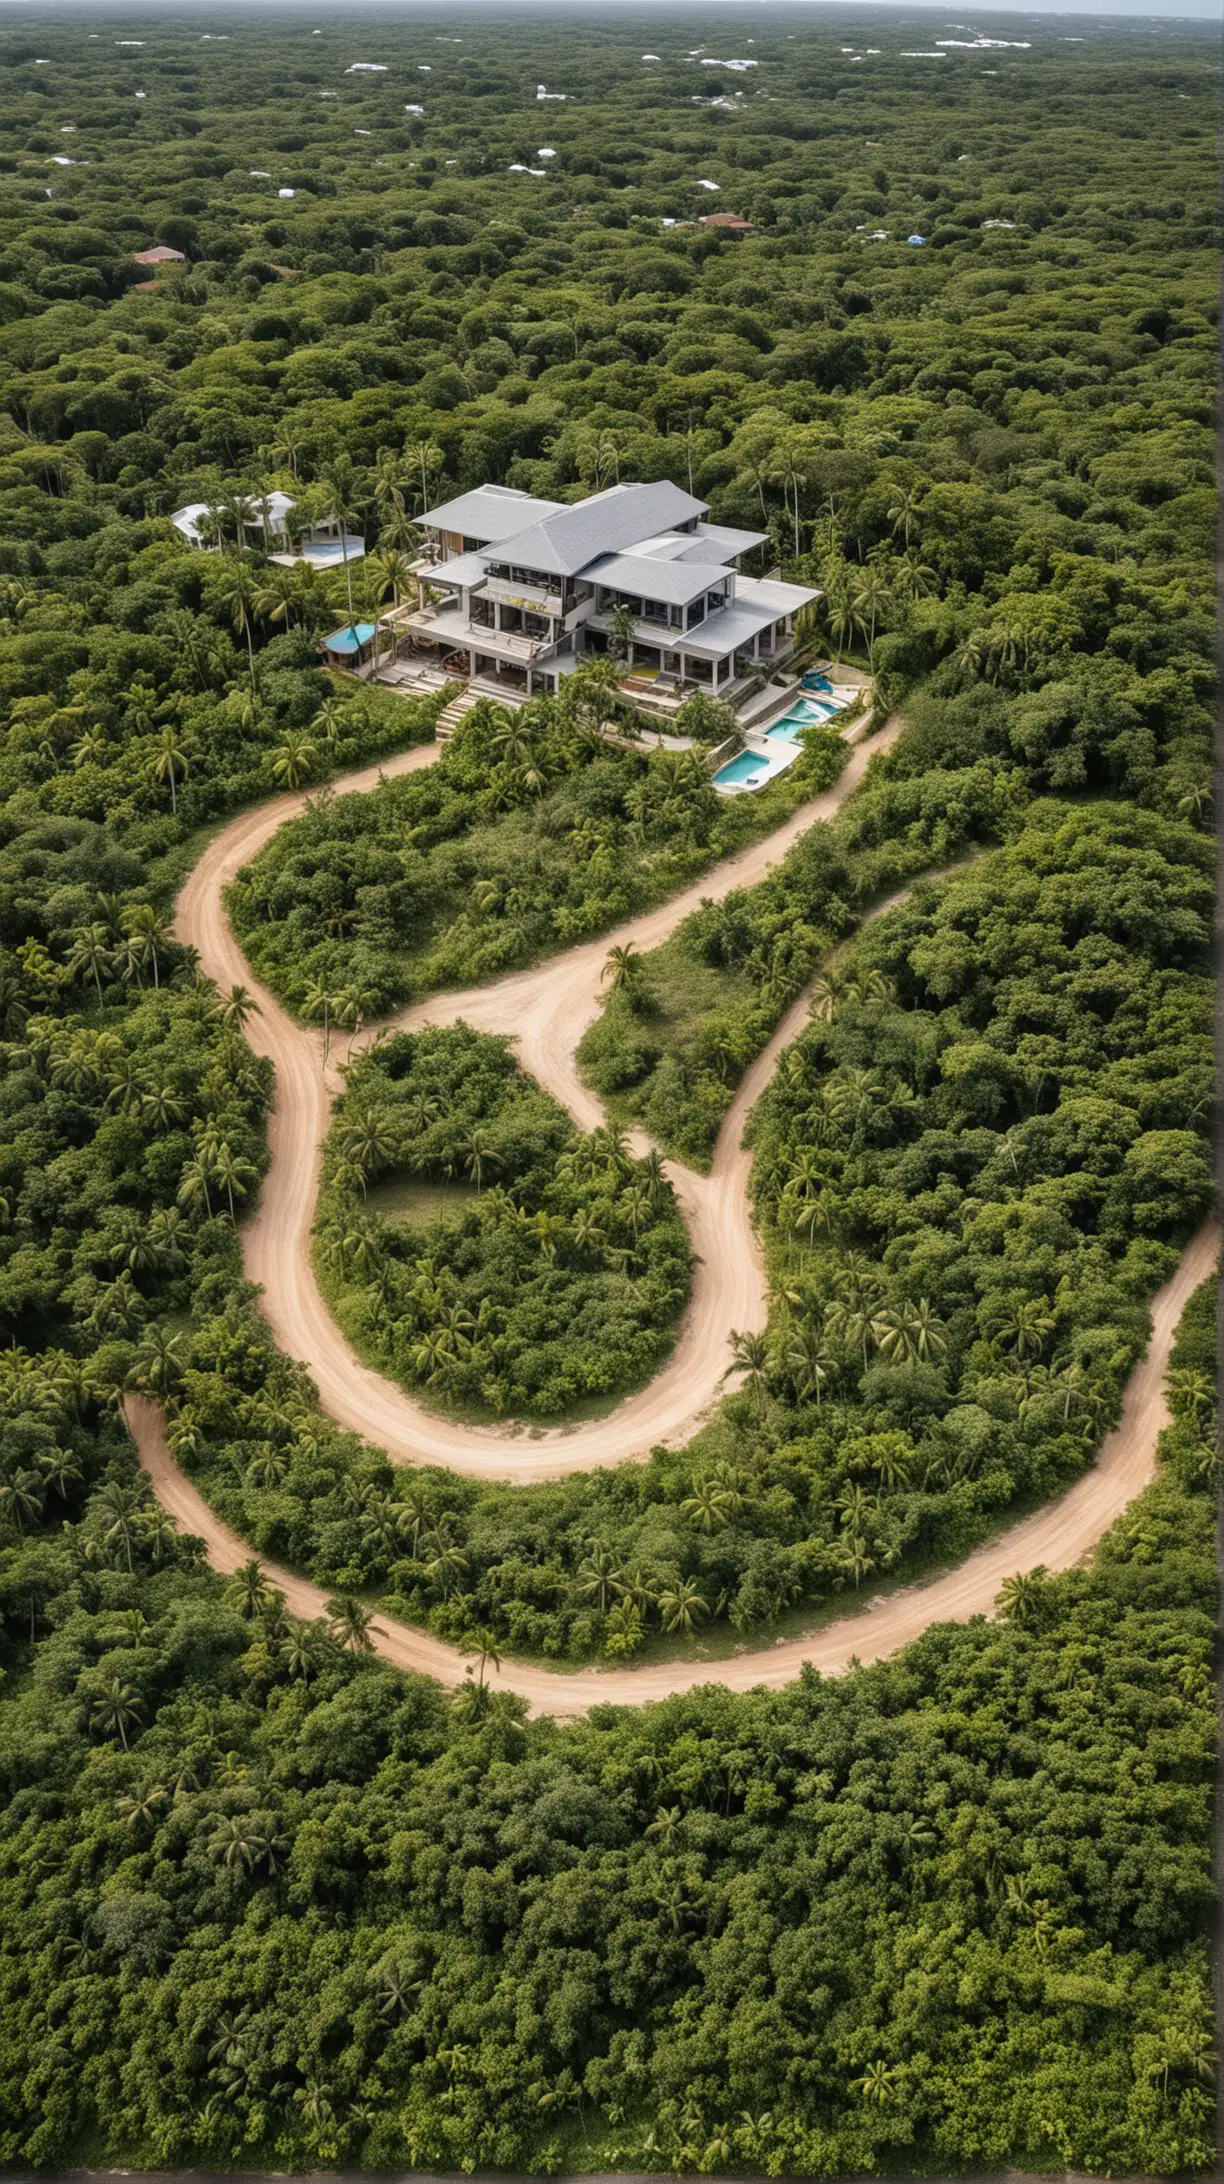 luxury carribean house with motocross trail around, land art style